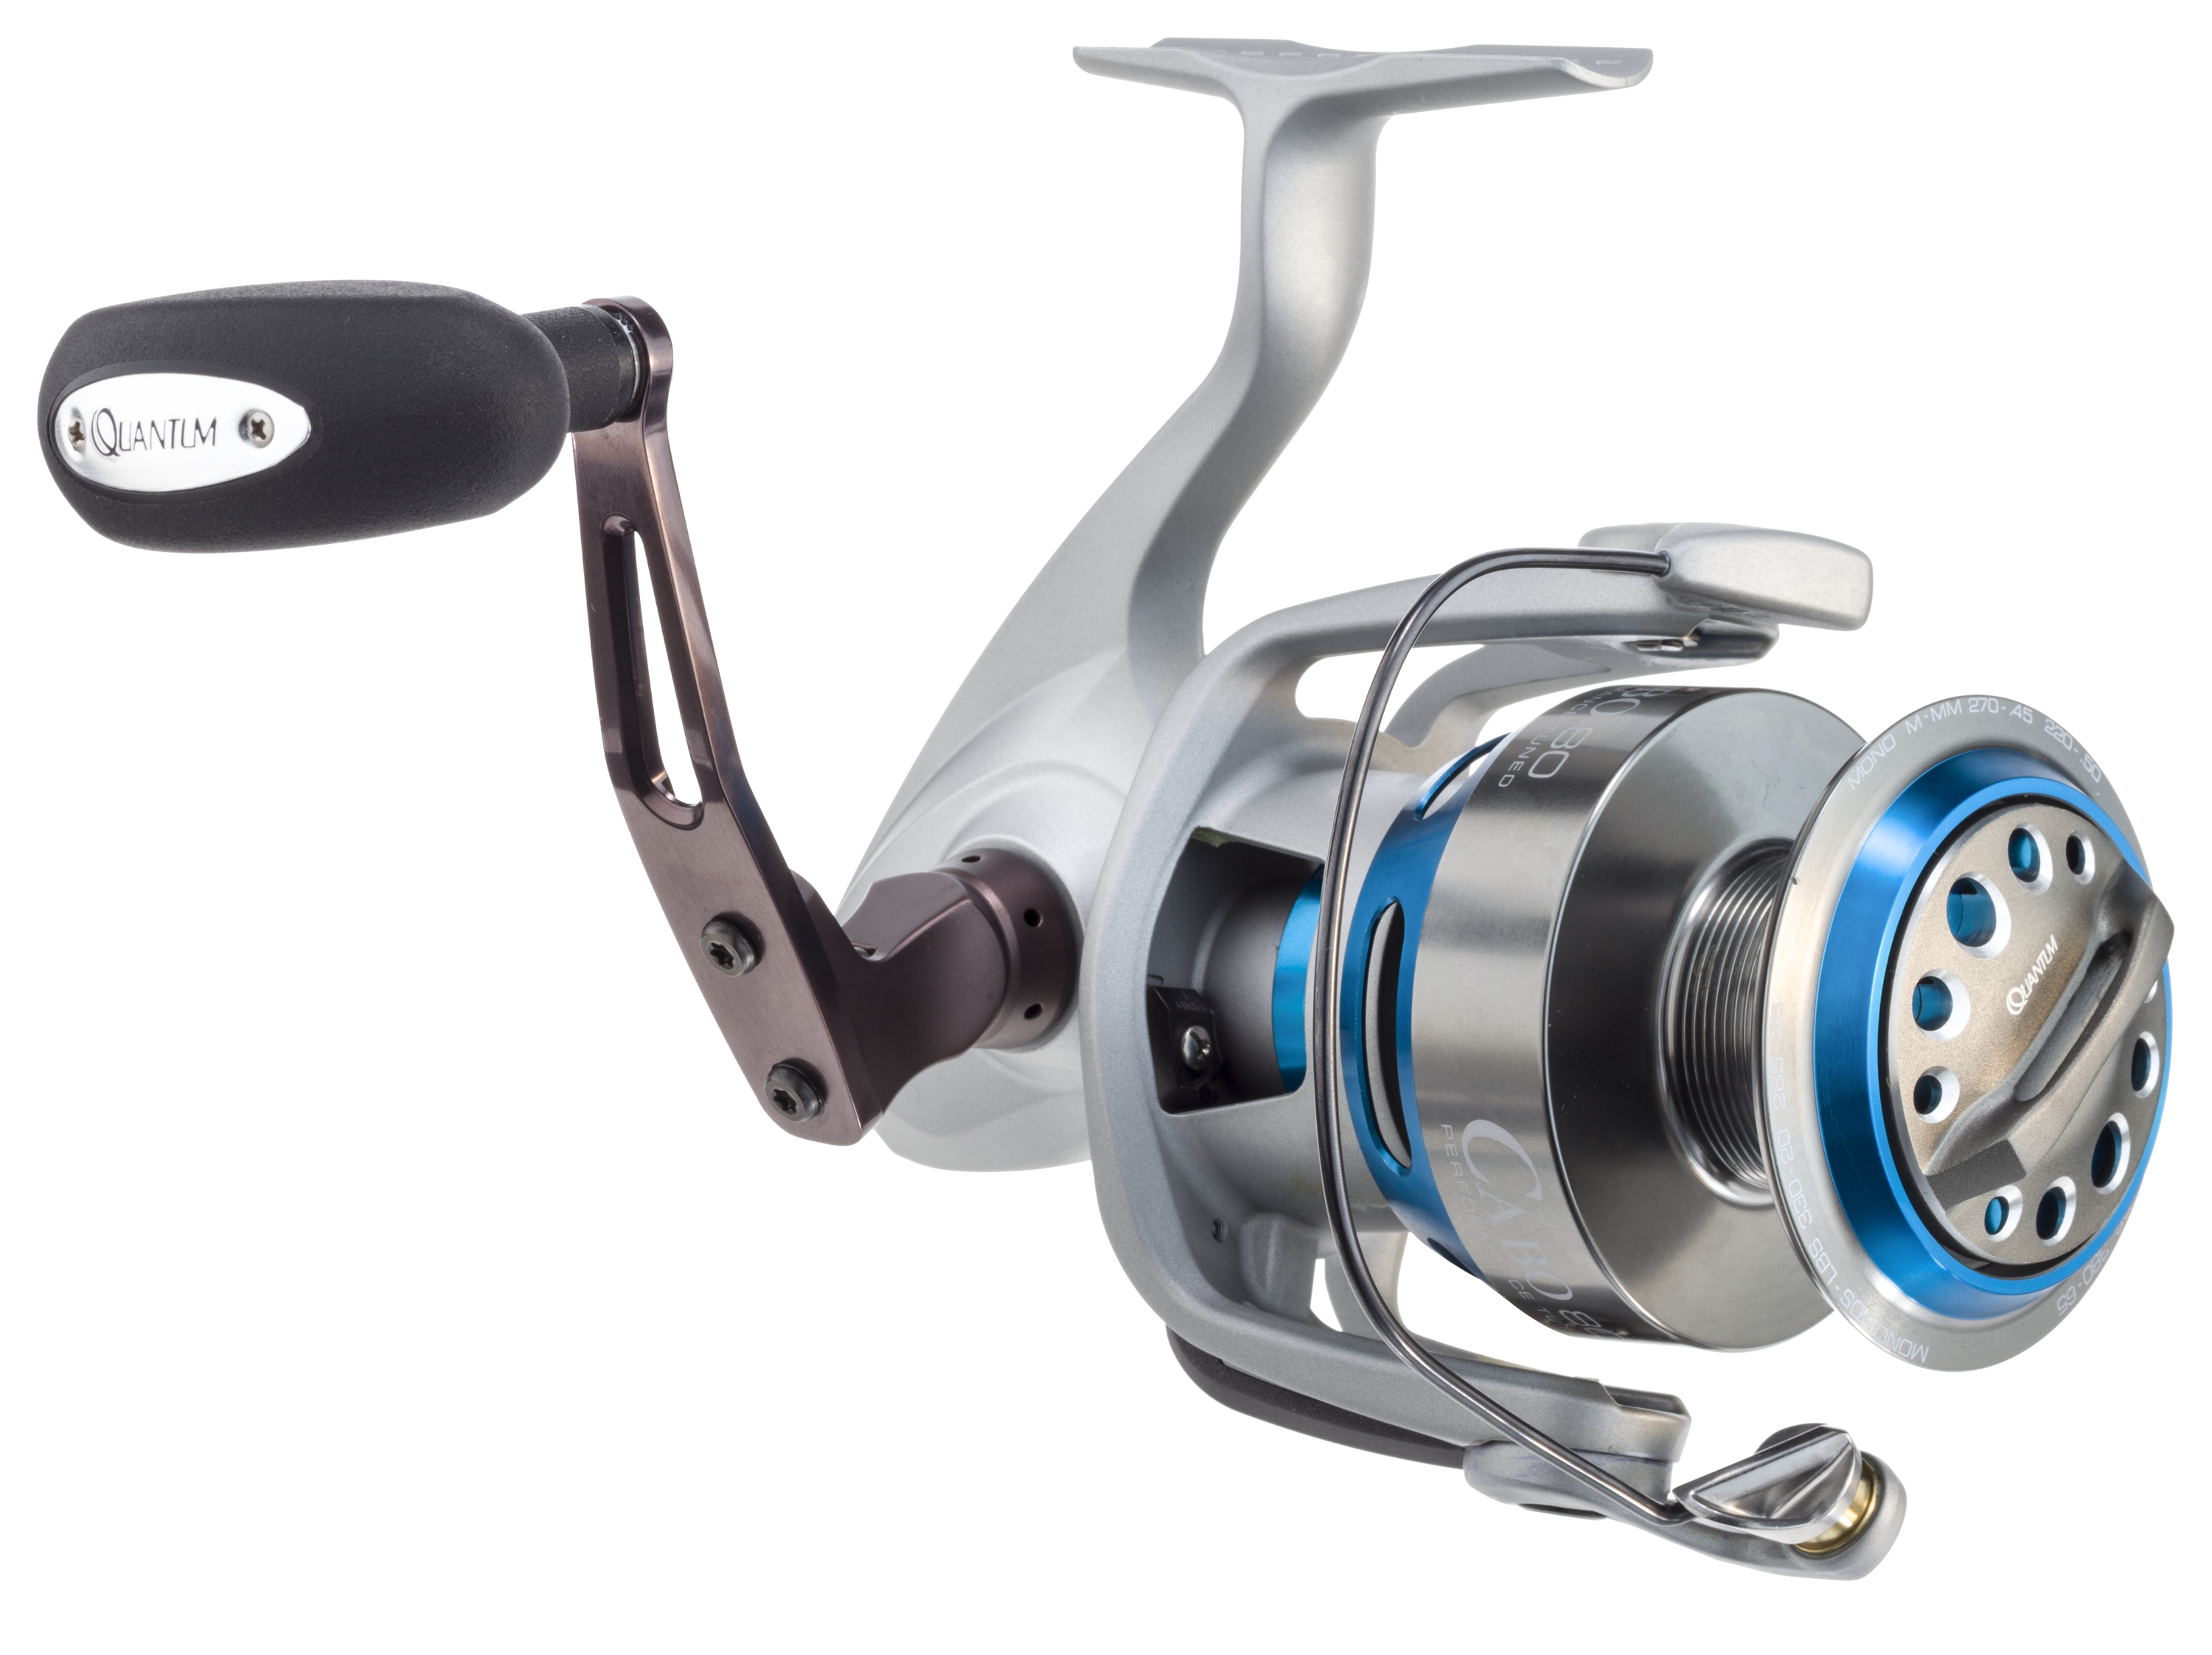 Quantum Cabo 60 PT Spinning reel for Sale in Lakewood, CA